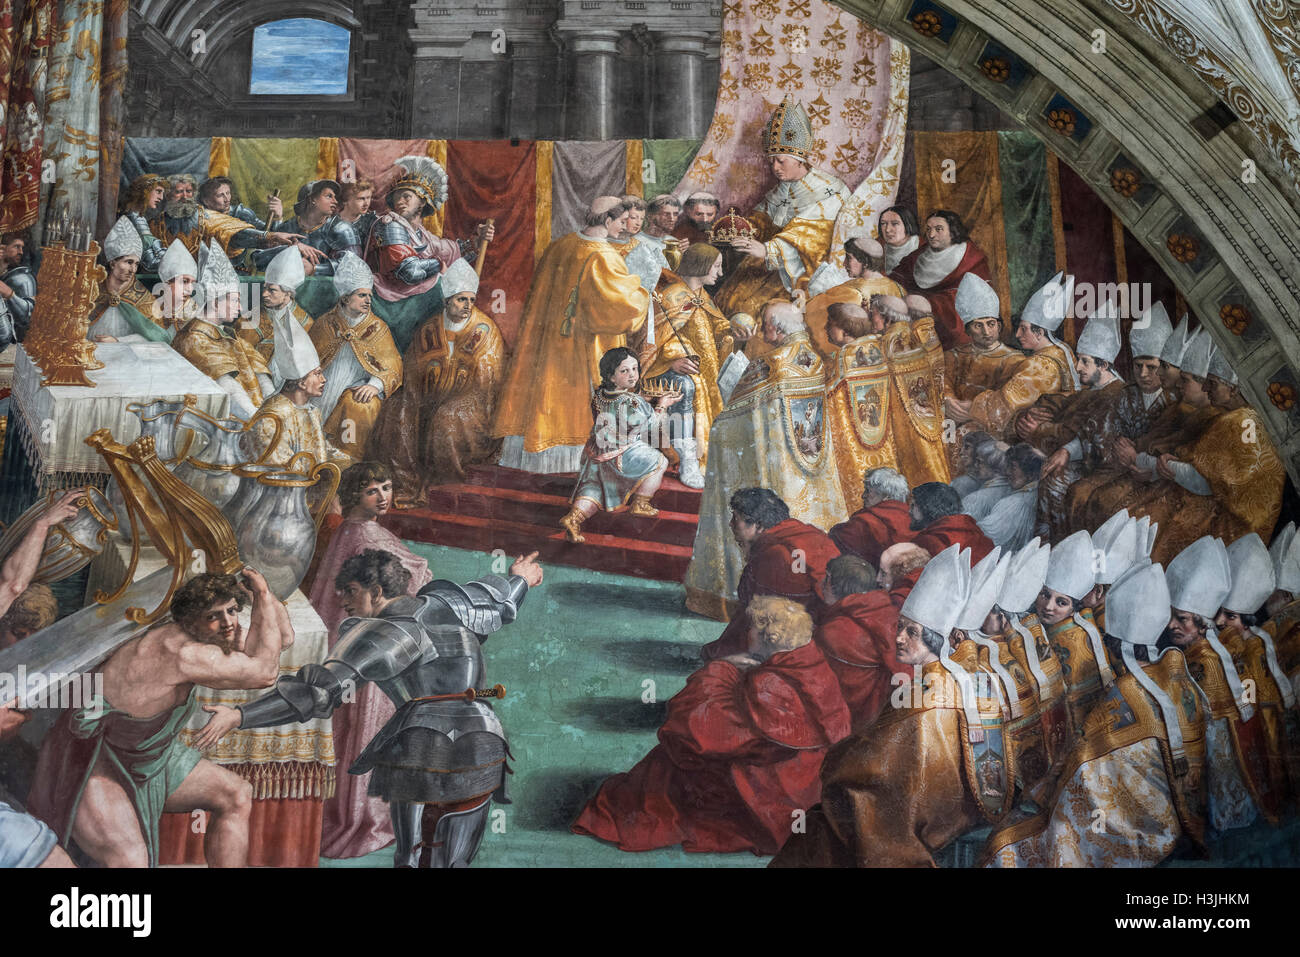 Rome. Italy. Fresco (1516-1517) The Coronation of Charlemagne, Hall of the Fire in the Borgo, Vatican Museums. Stock Photo